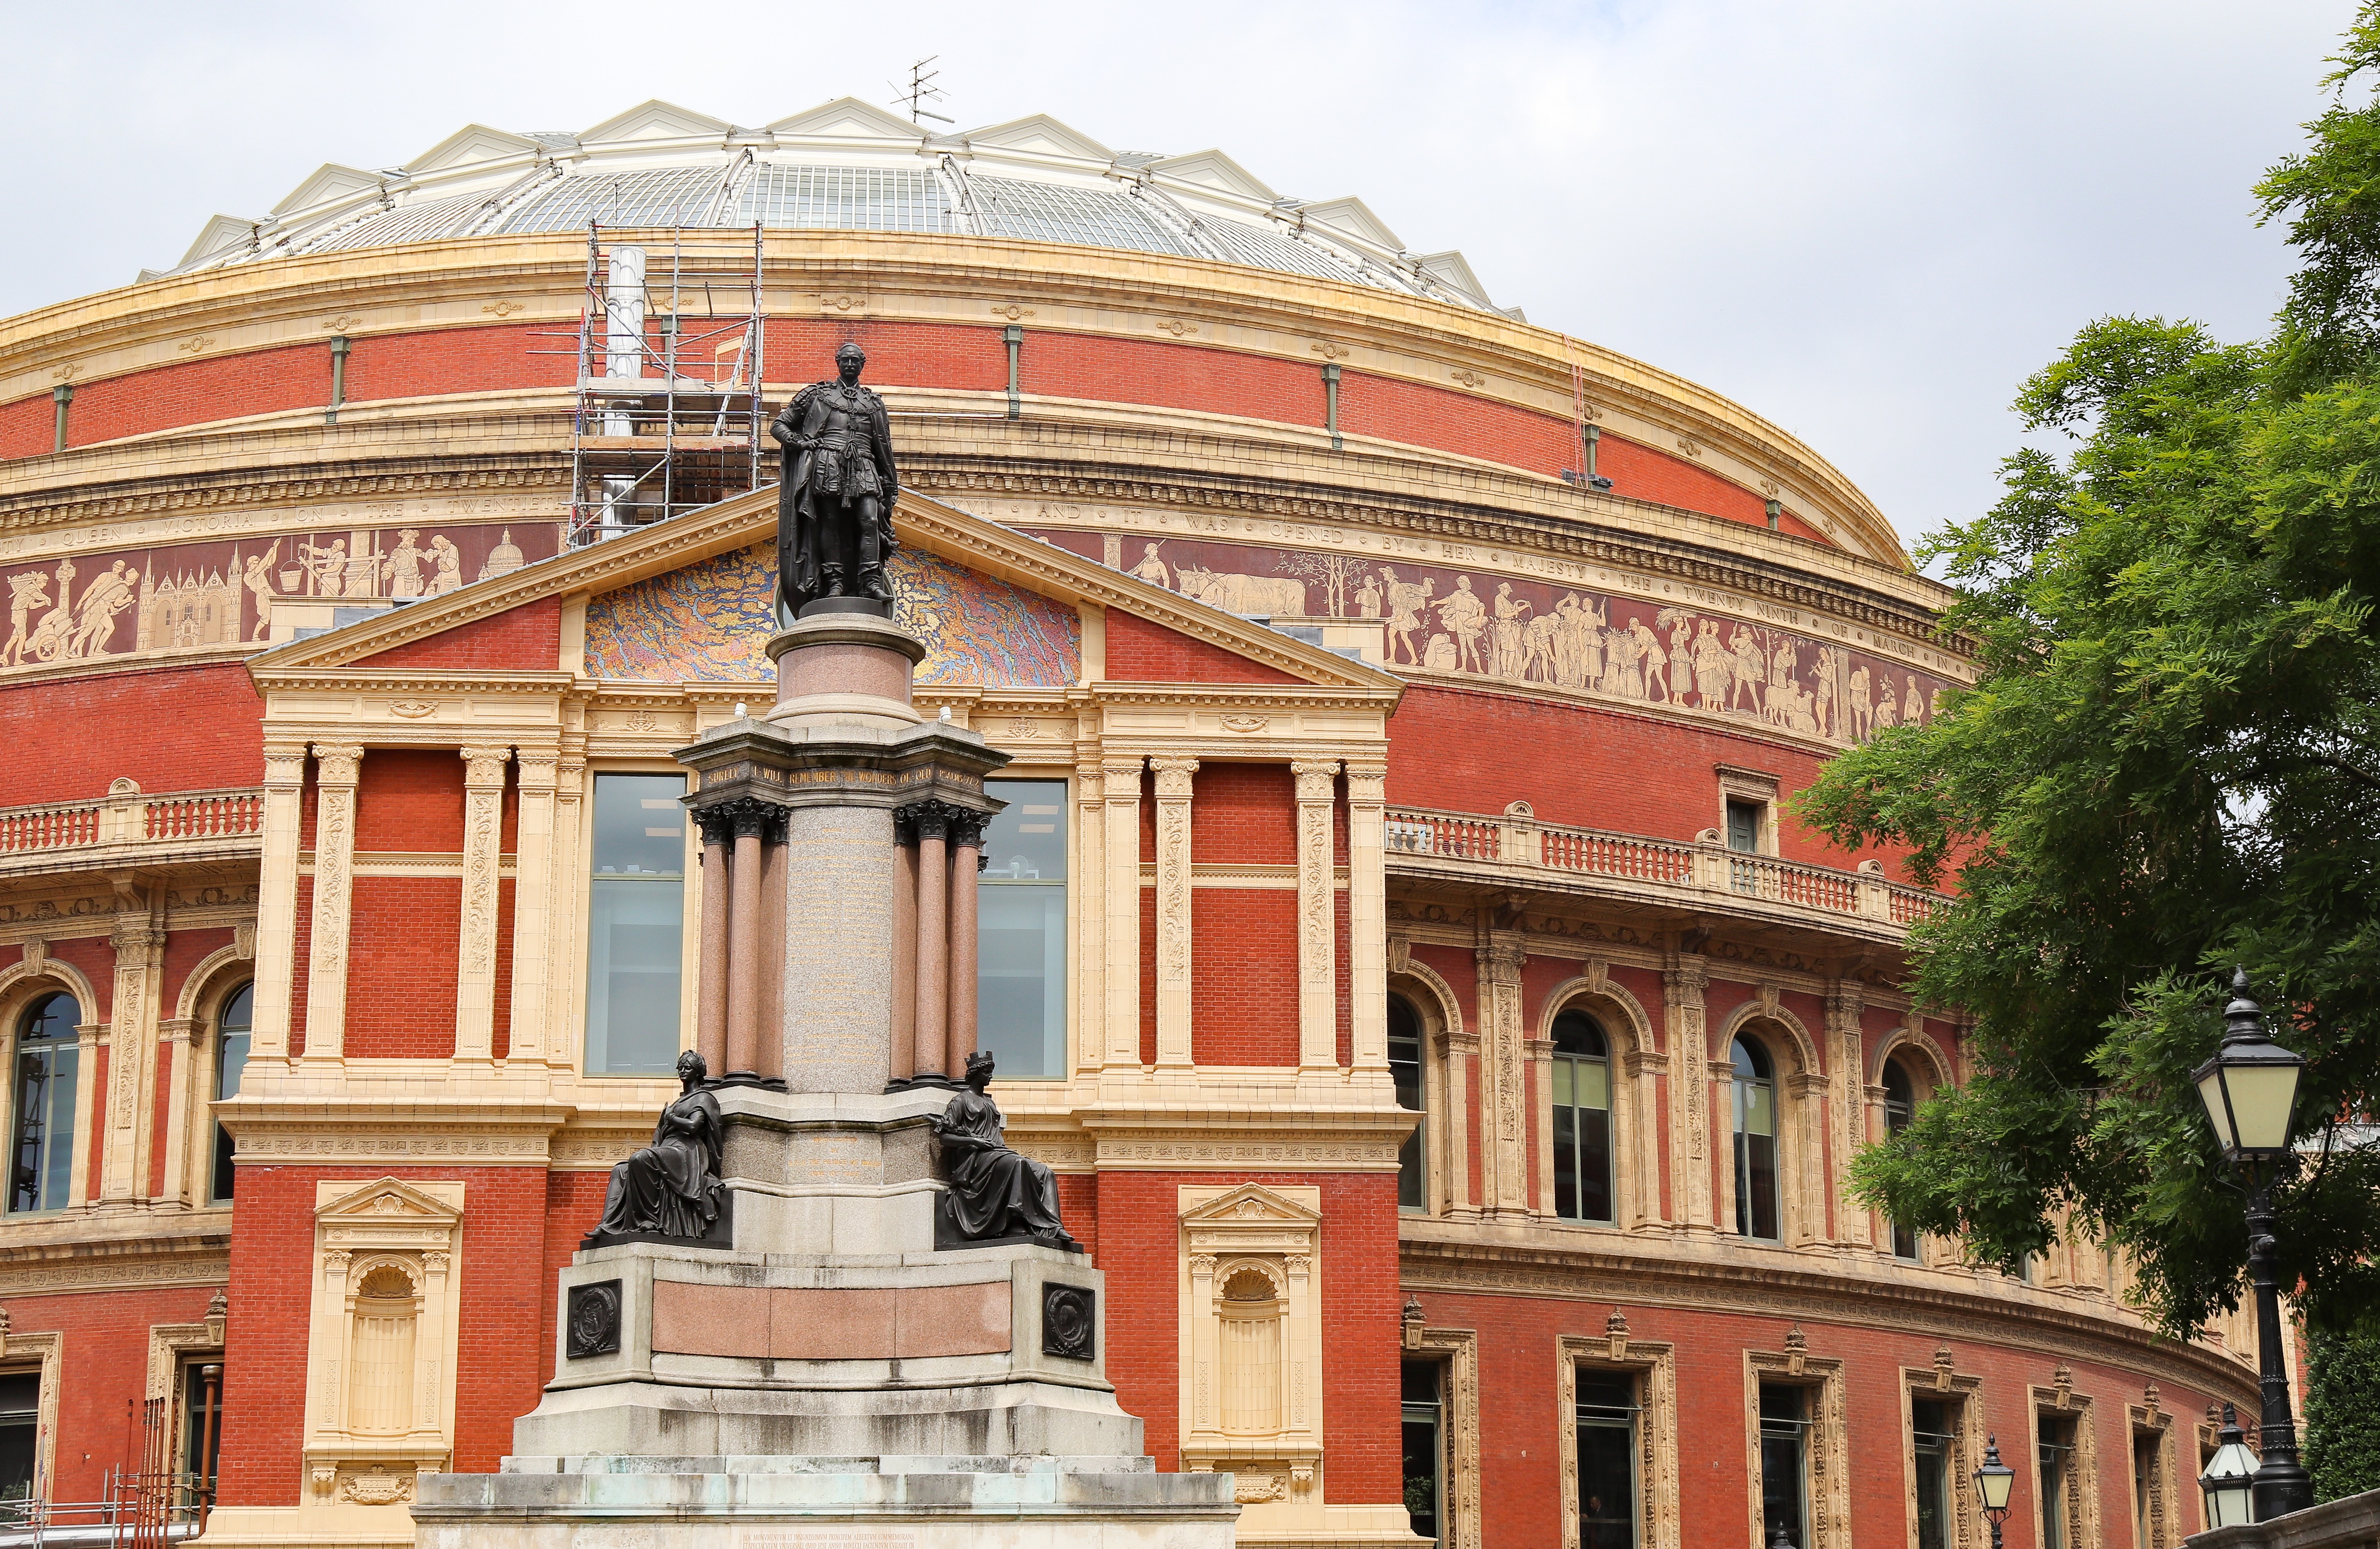 The Royal Albert Hall from the south